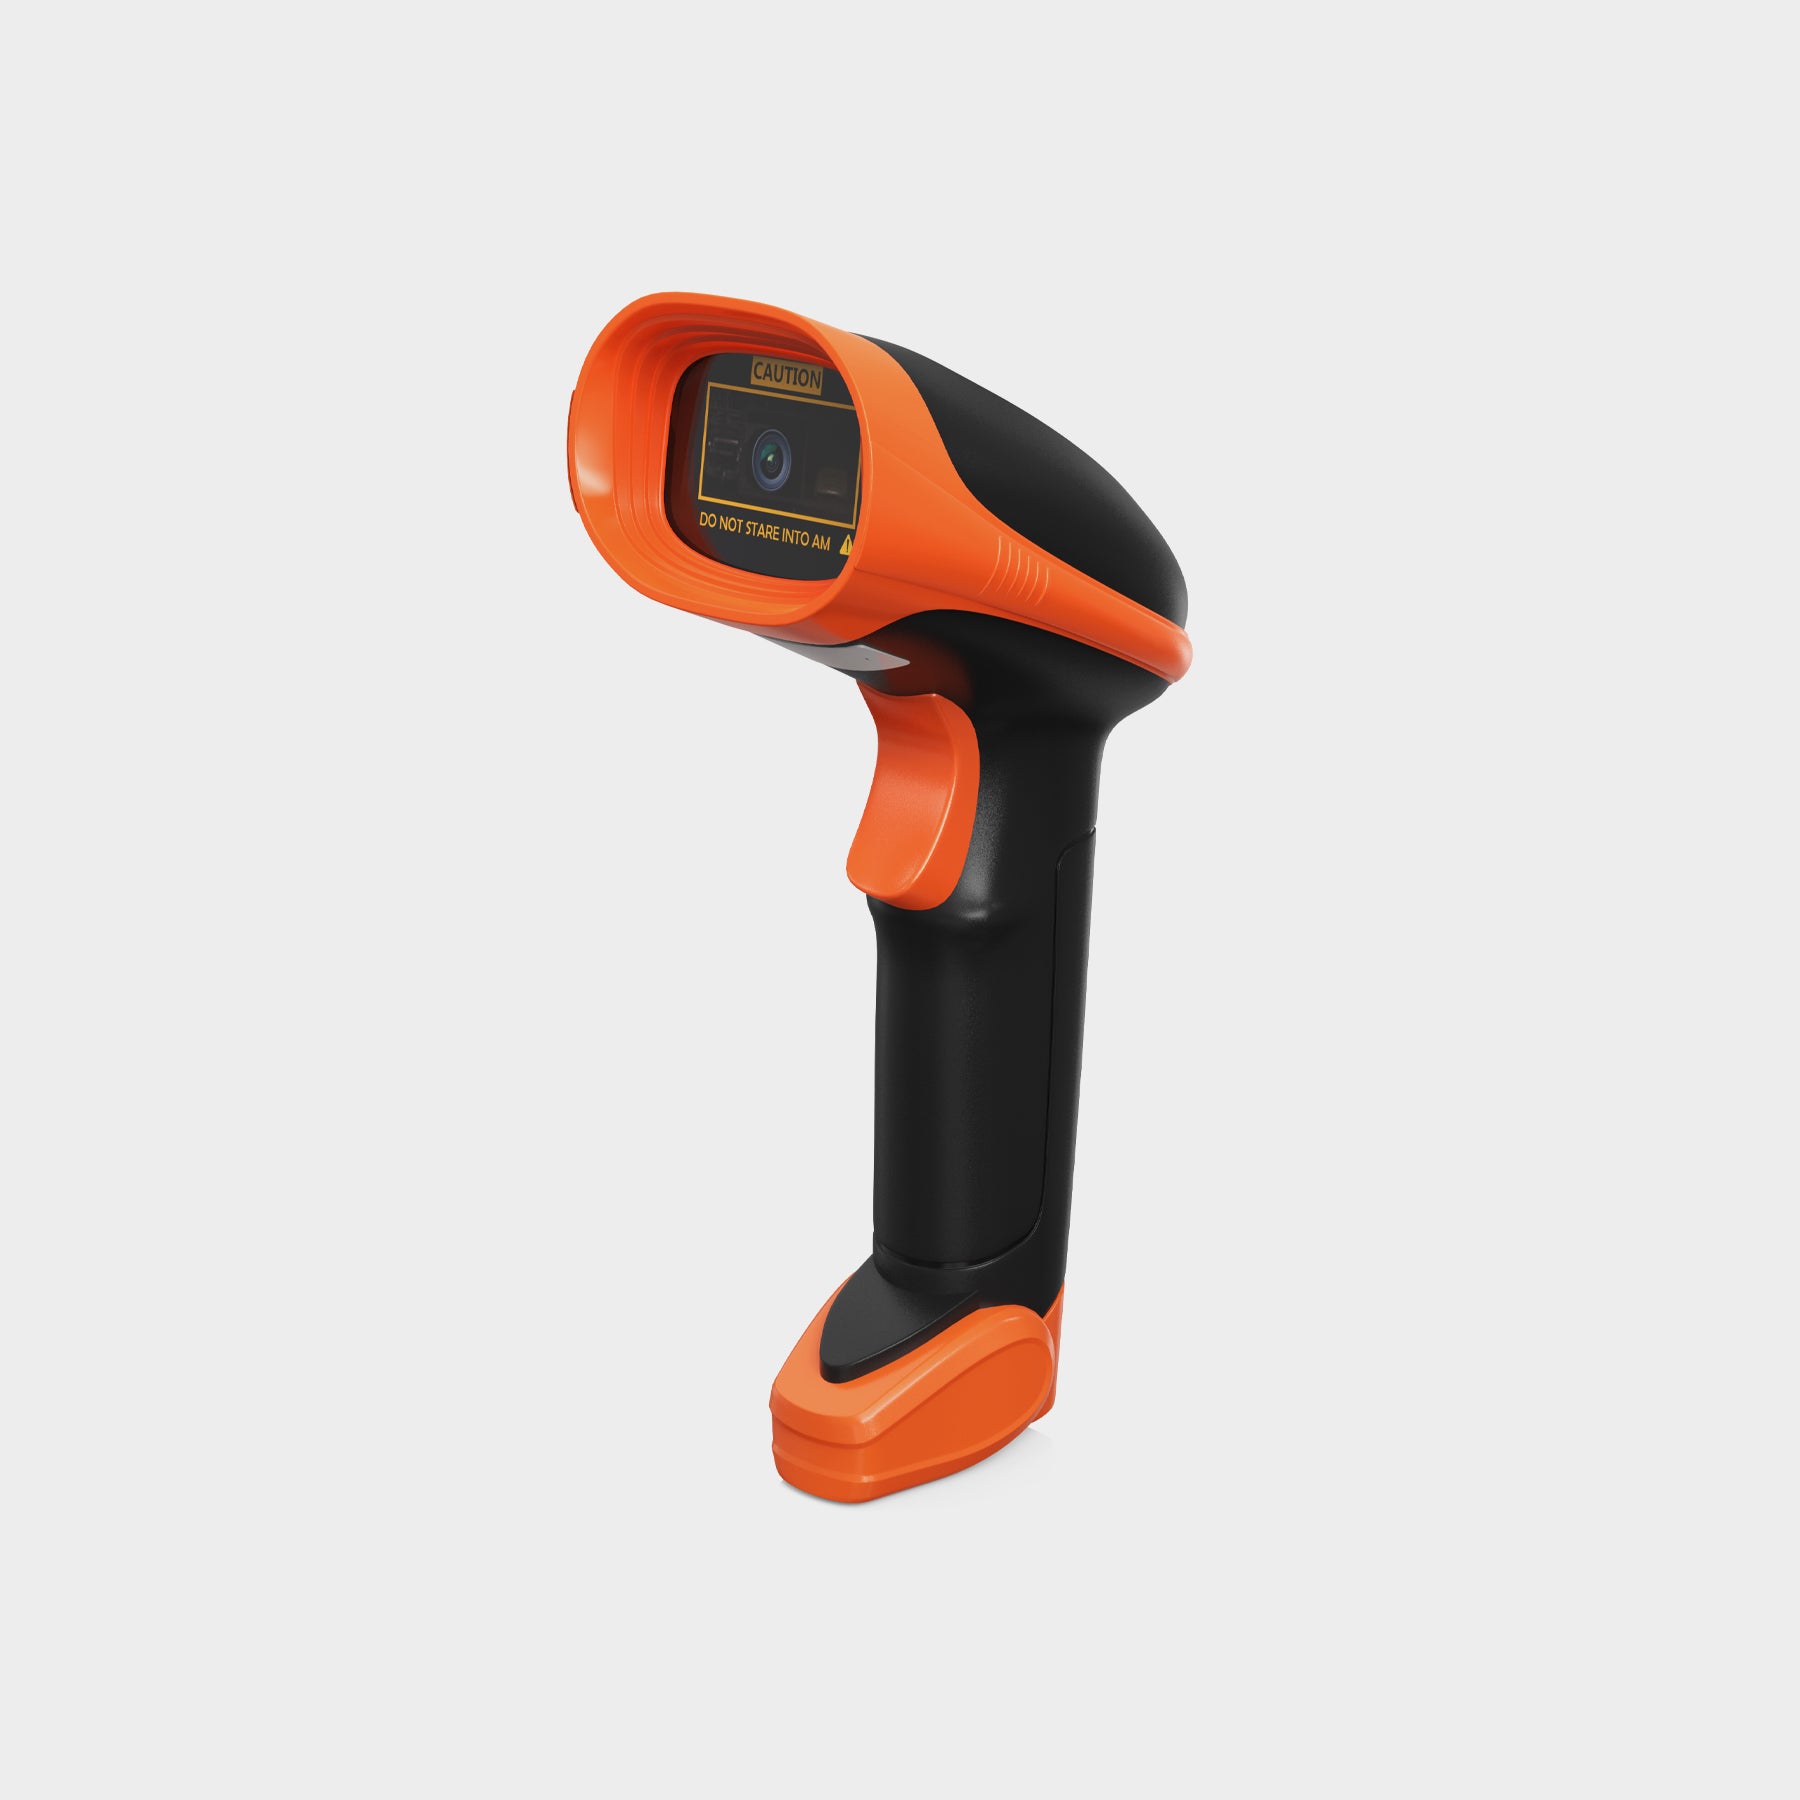 AMBIR BR200 Wireless Barcode Scanner with 2.4Ghz with Wireless USB Dongle - Black/Orange (BR200-BL)